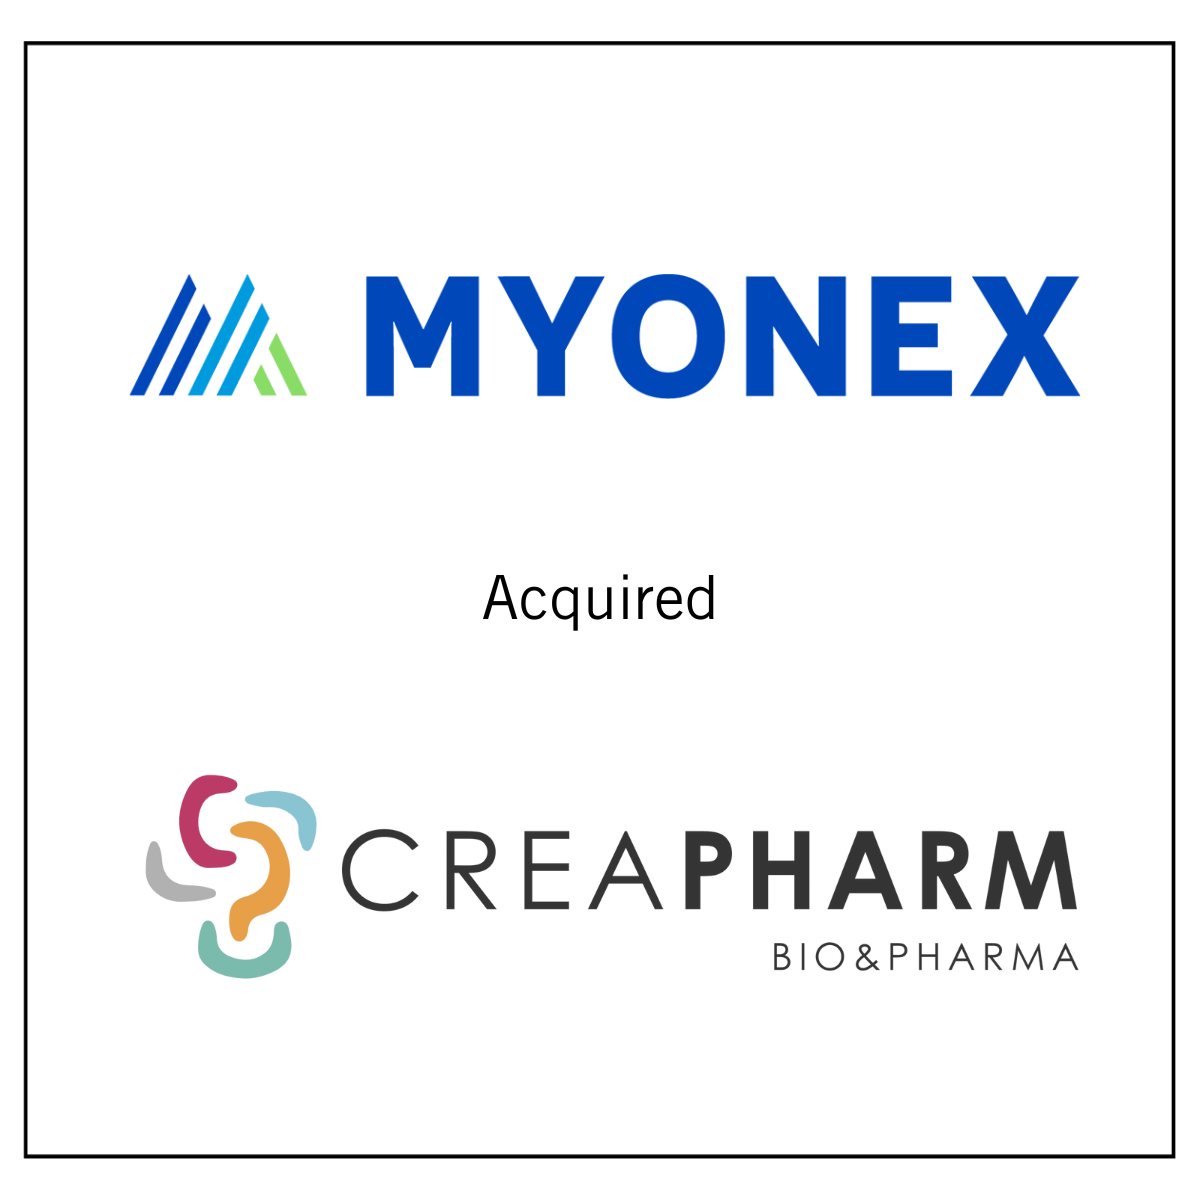 Myonex Acquired Creapharm's Clinical & Commercial Packaging and Bioservices Business Units to Expand Clinical Trial Supply Services and Gain of Foothold in Europe